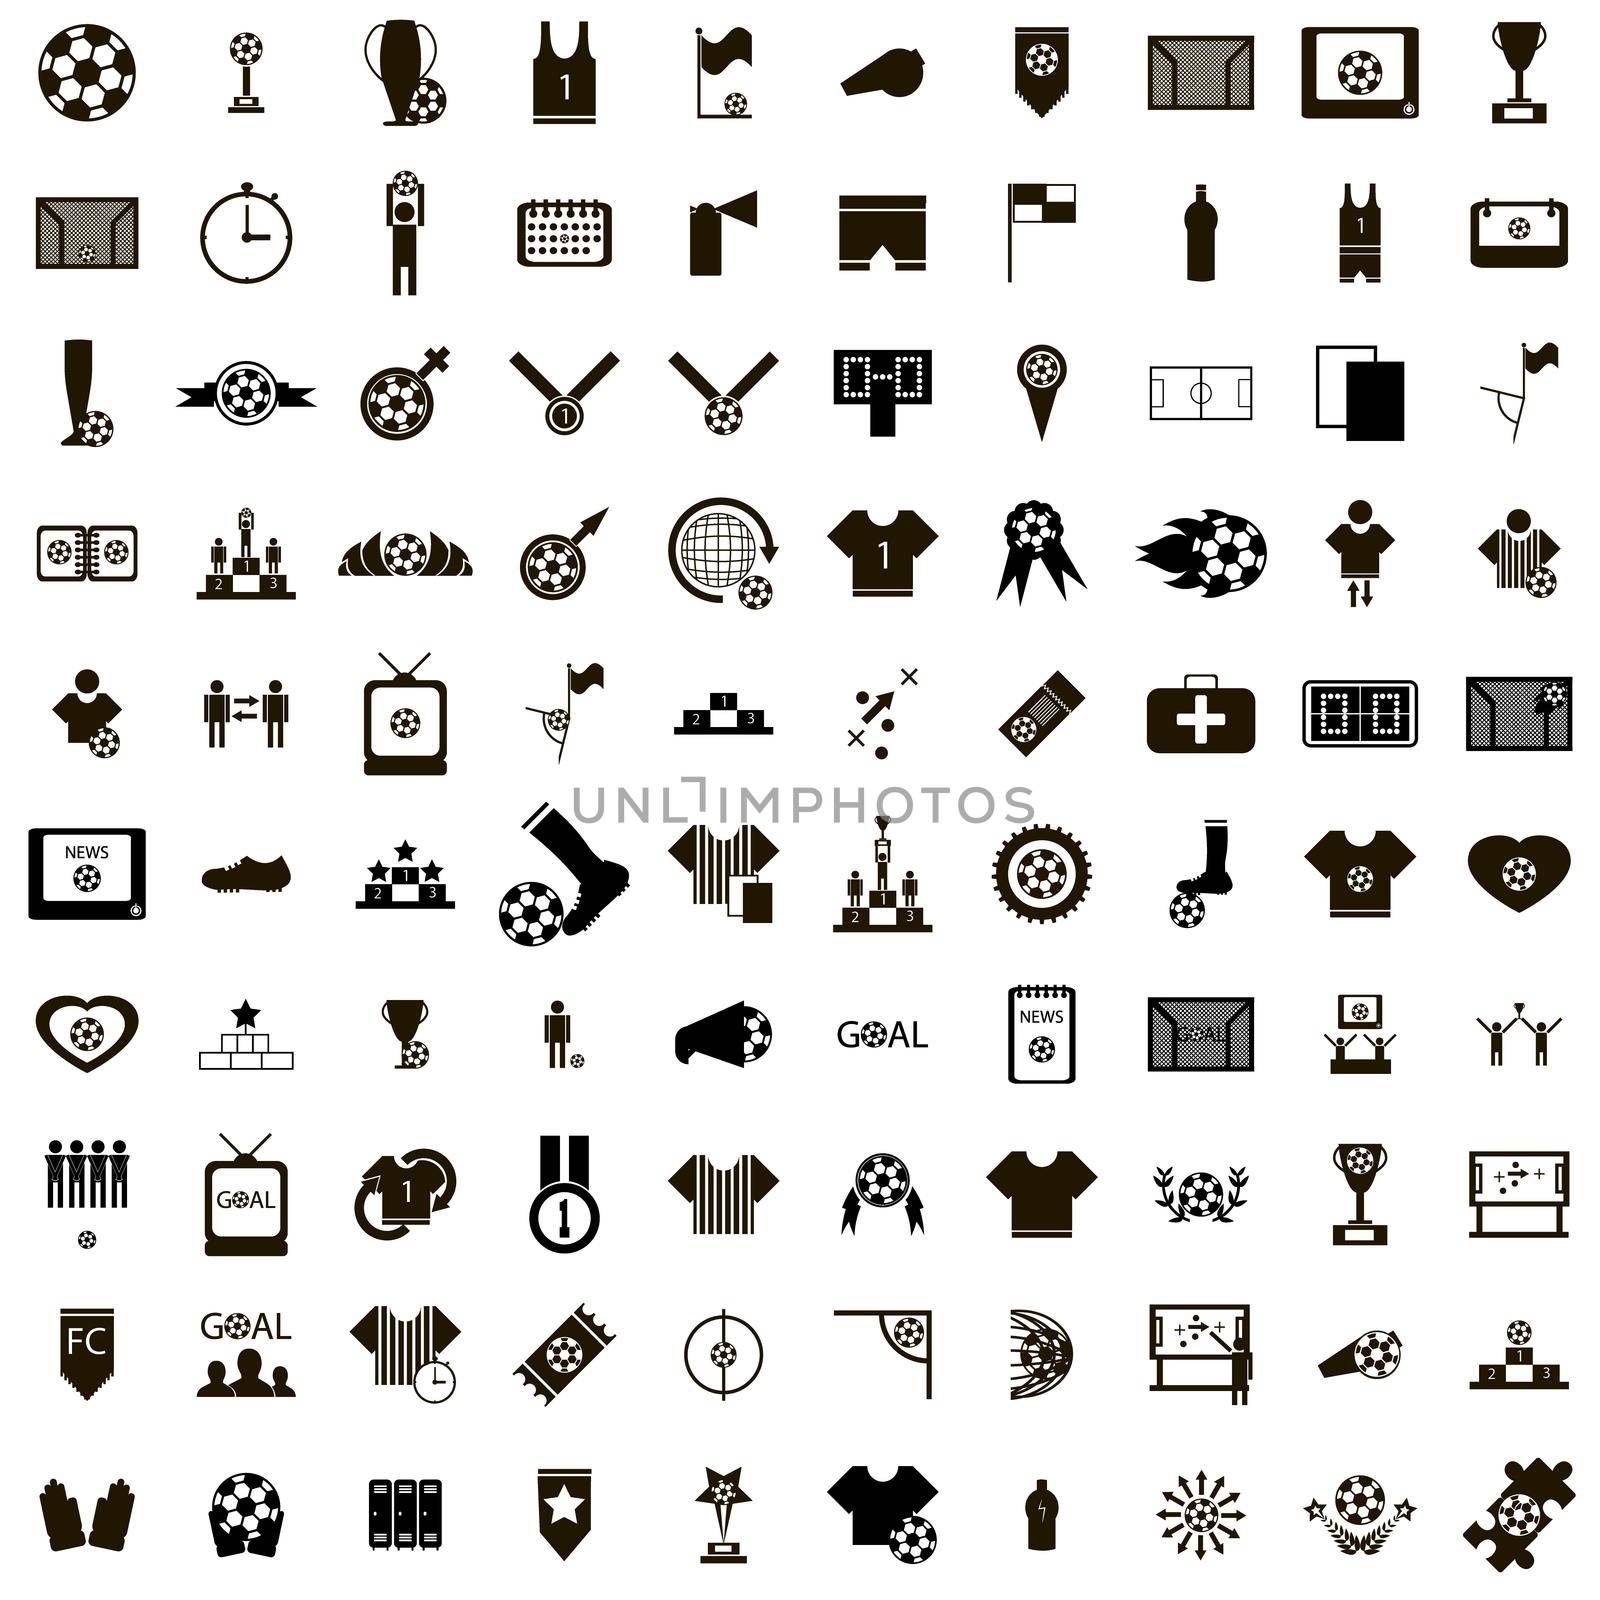 100 Soccer Icons set by ylivdesign